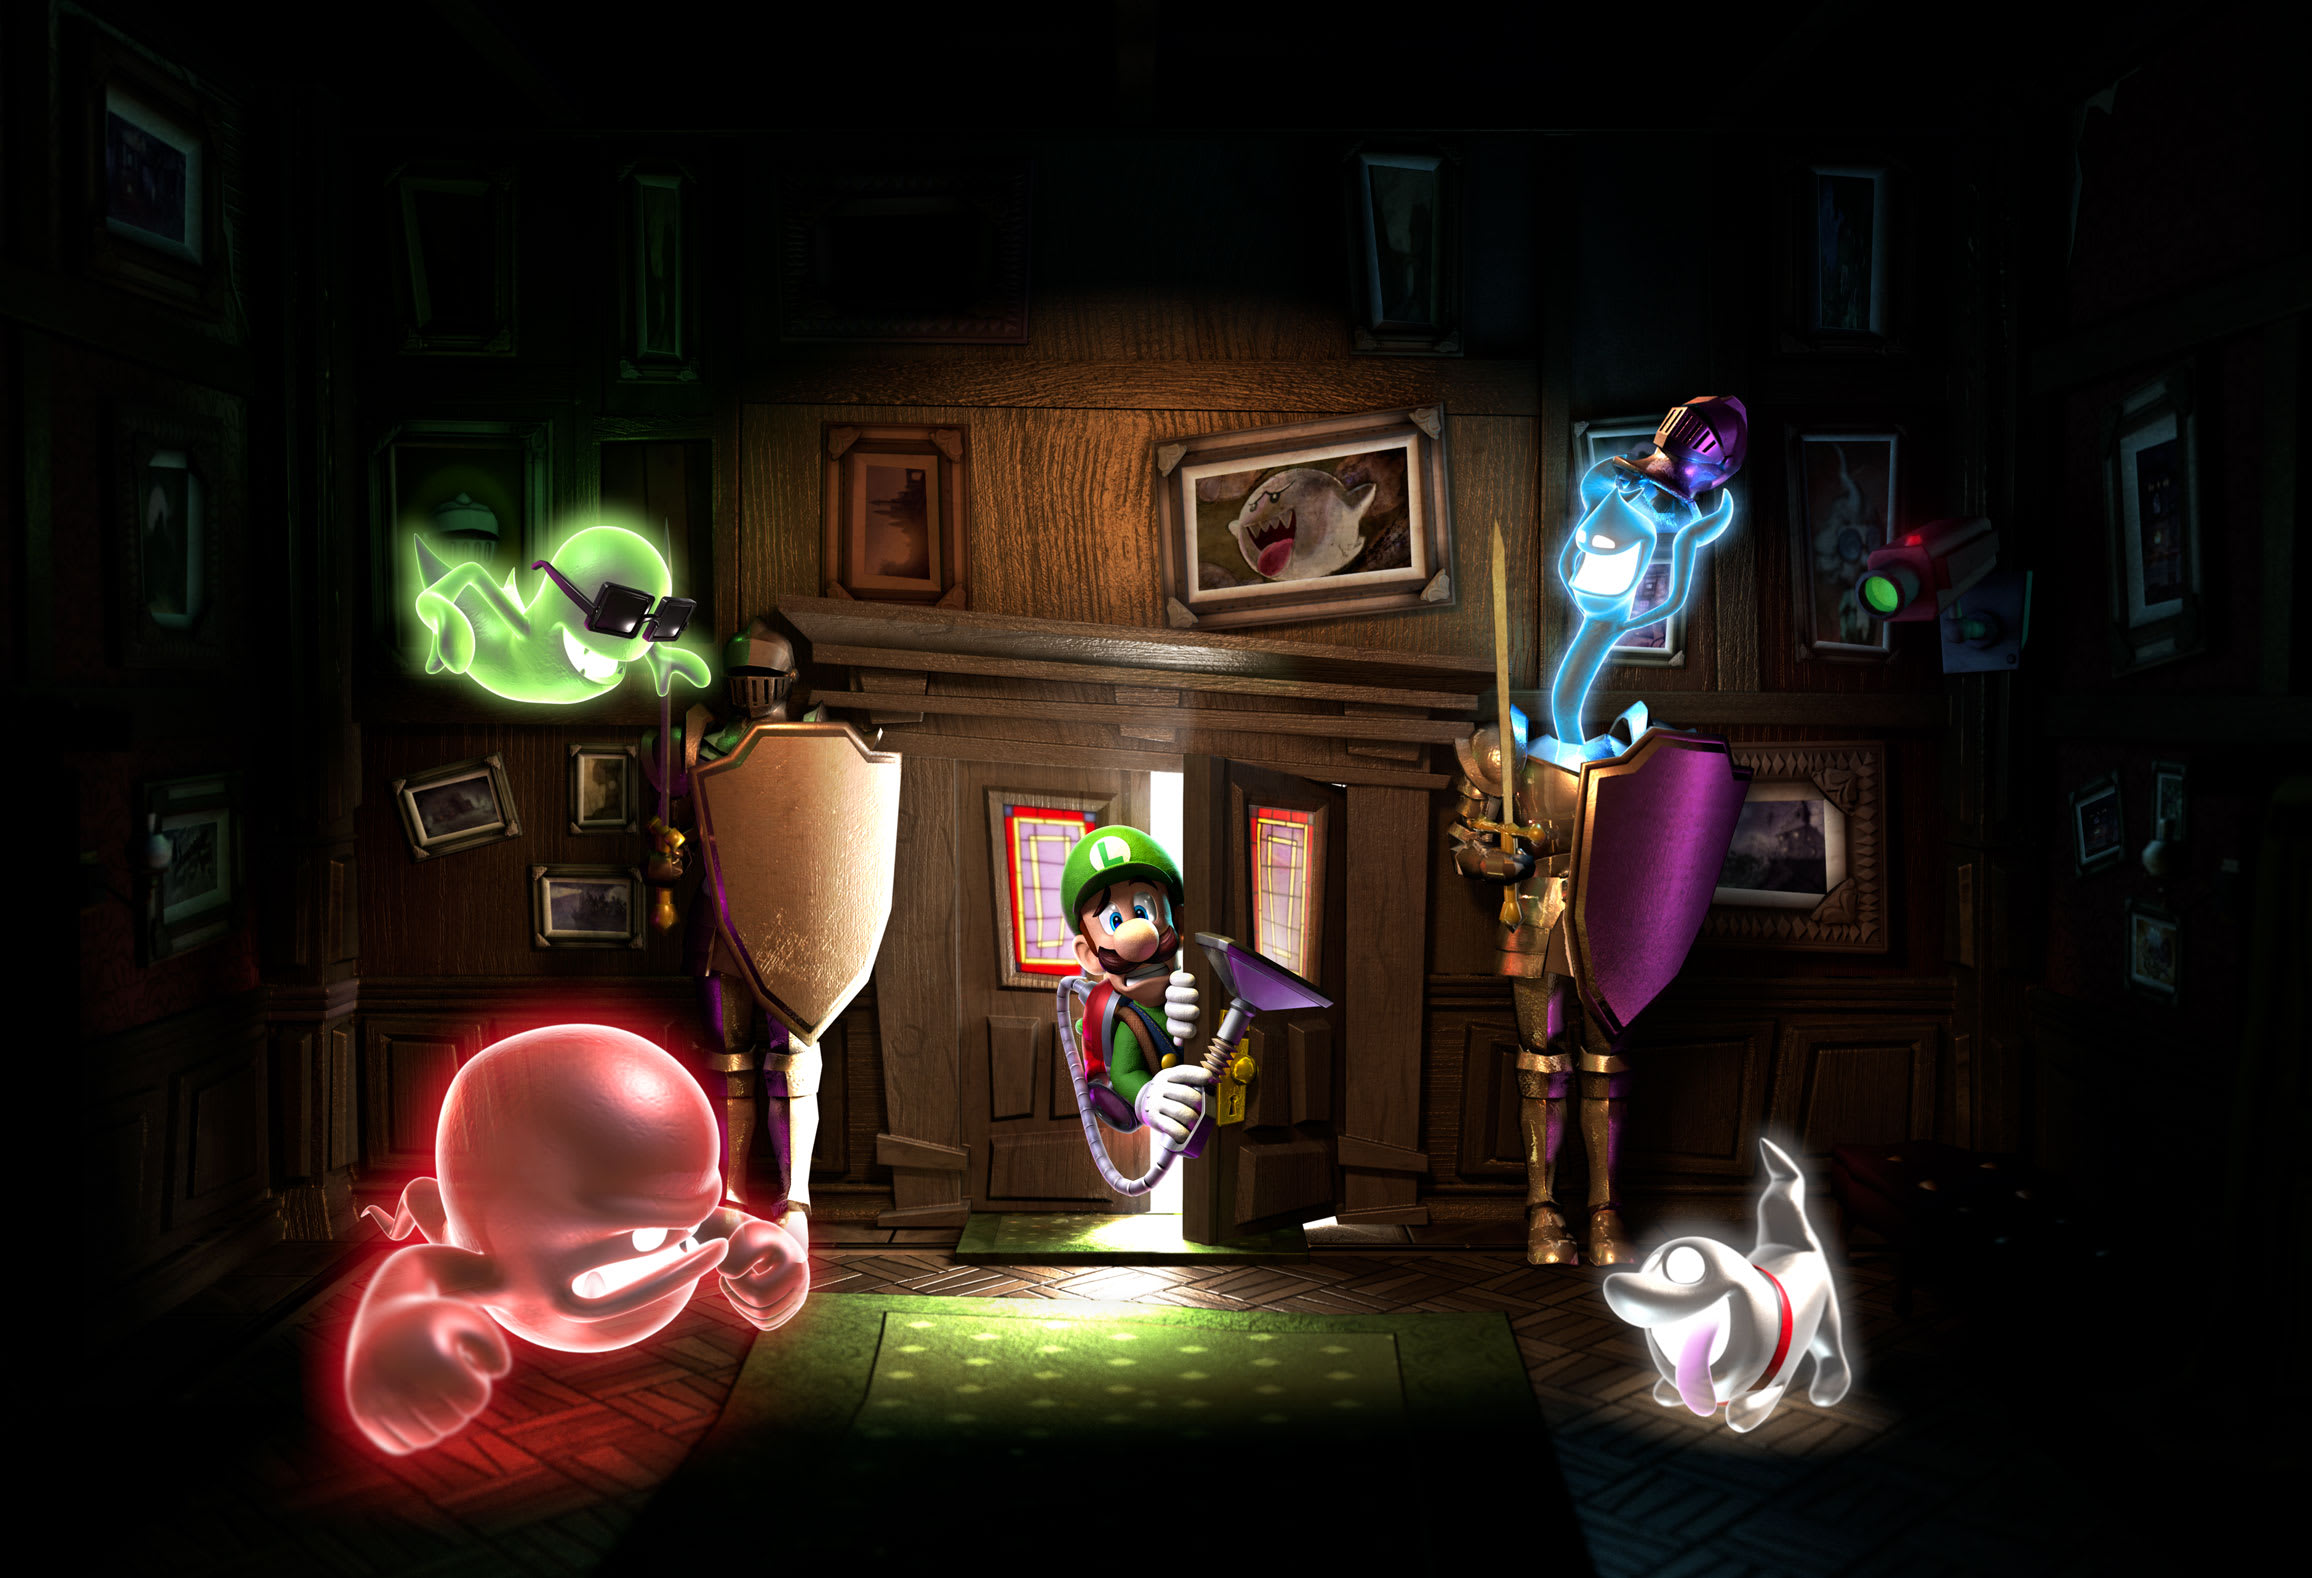 A scared Luigi carefully enters a room inside a mansion. The room is full of mischievous ghosts.